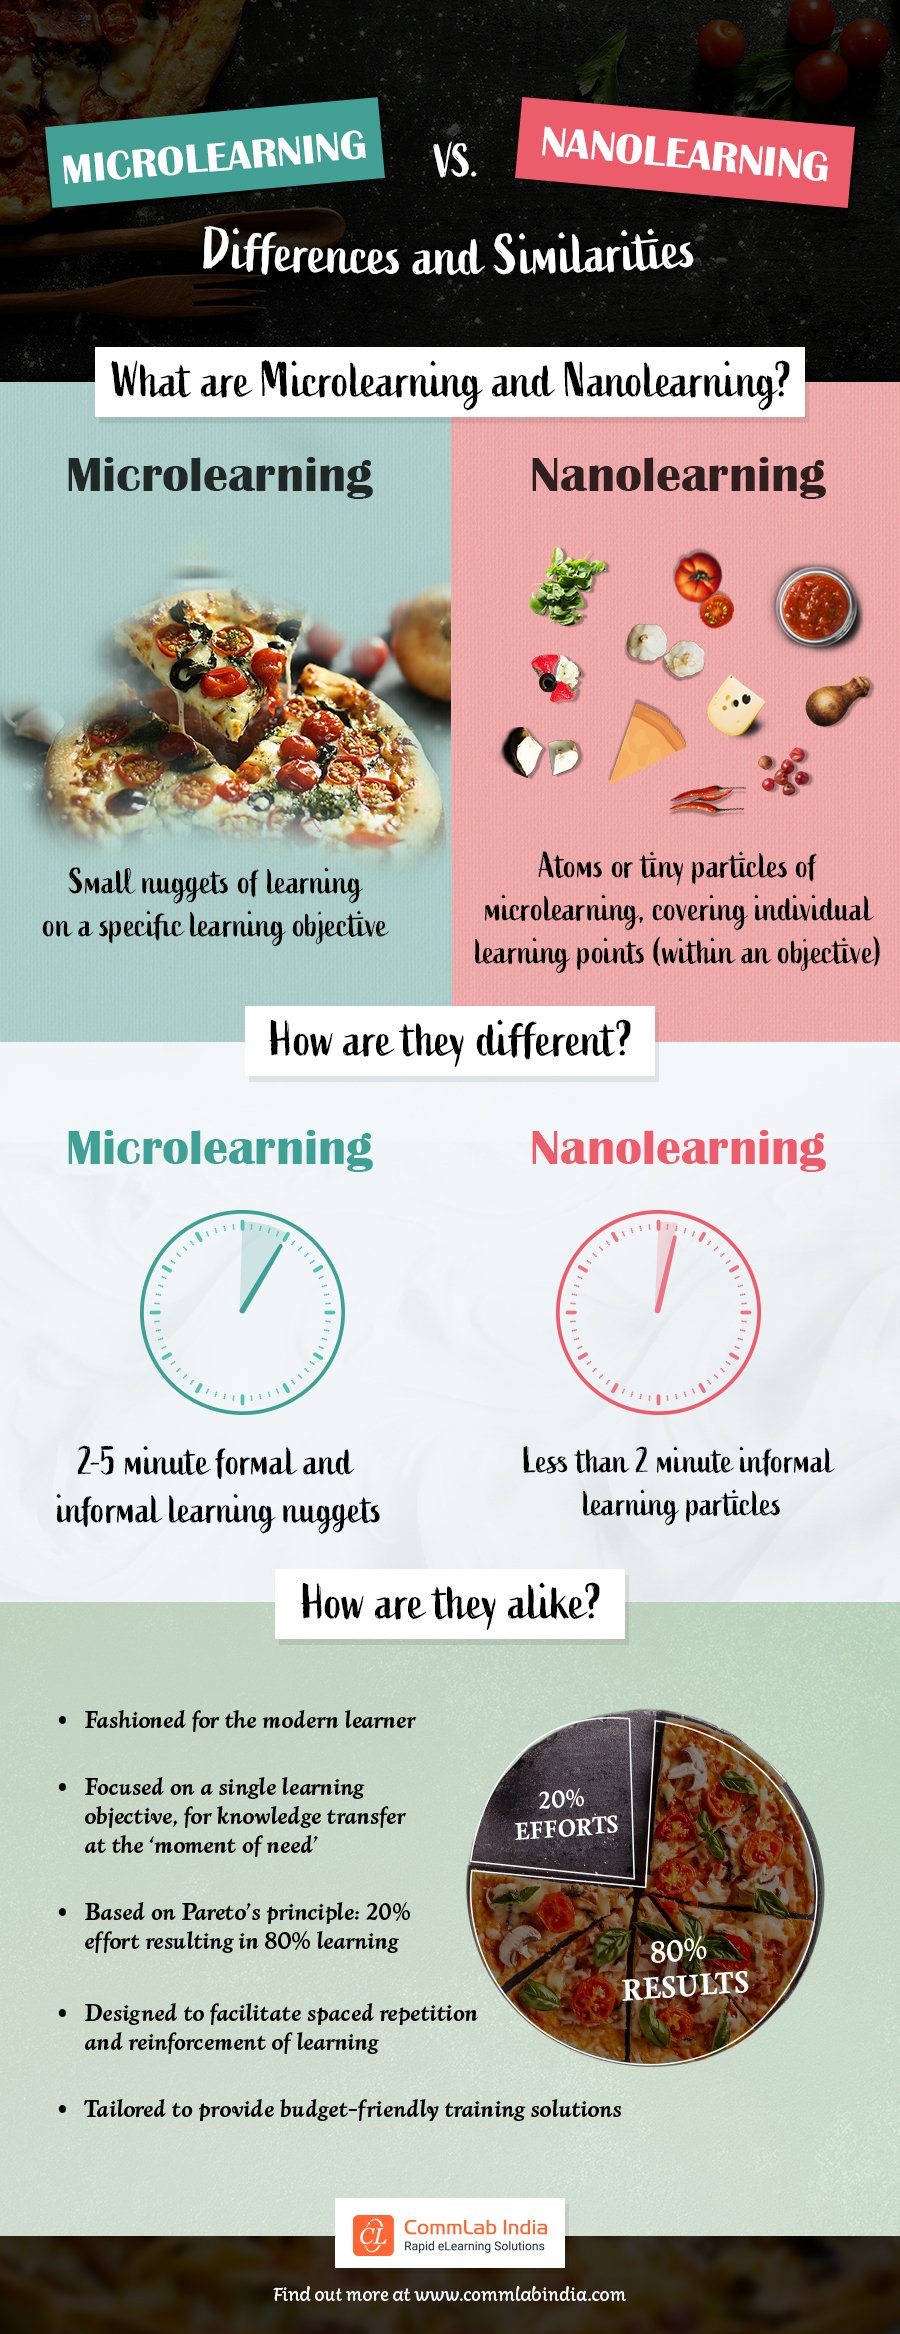 Microlearning vs. Nanolearning: Differences and Similarities [Infographic]